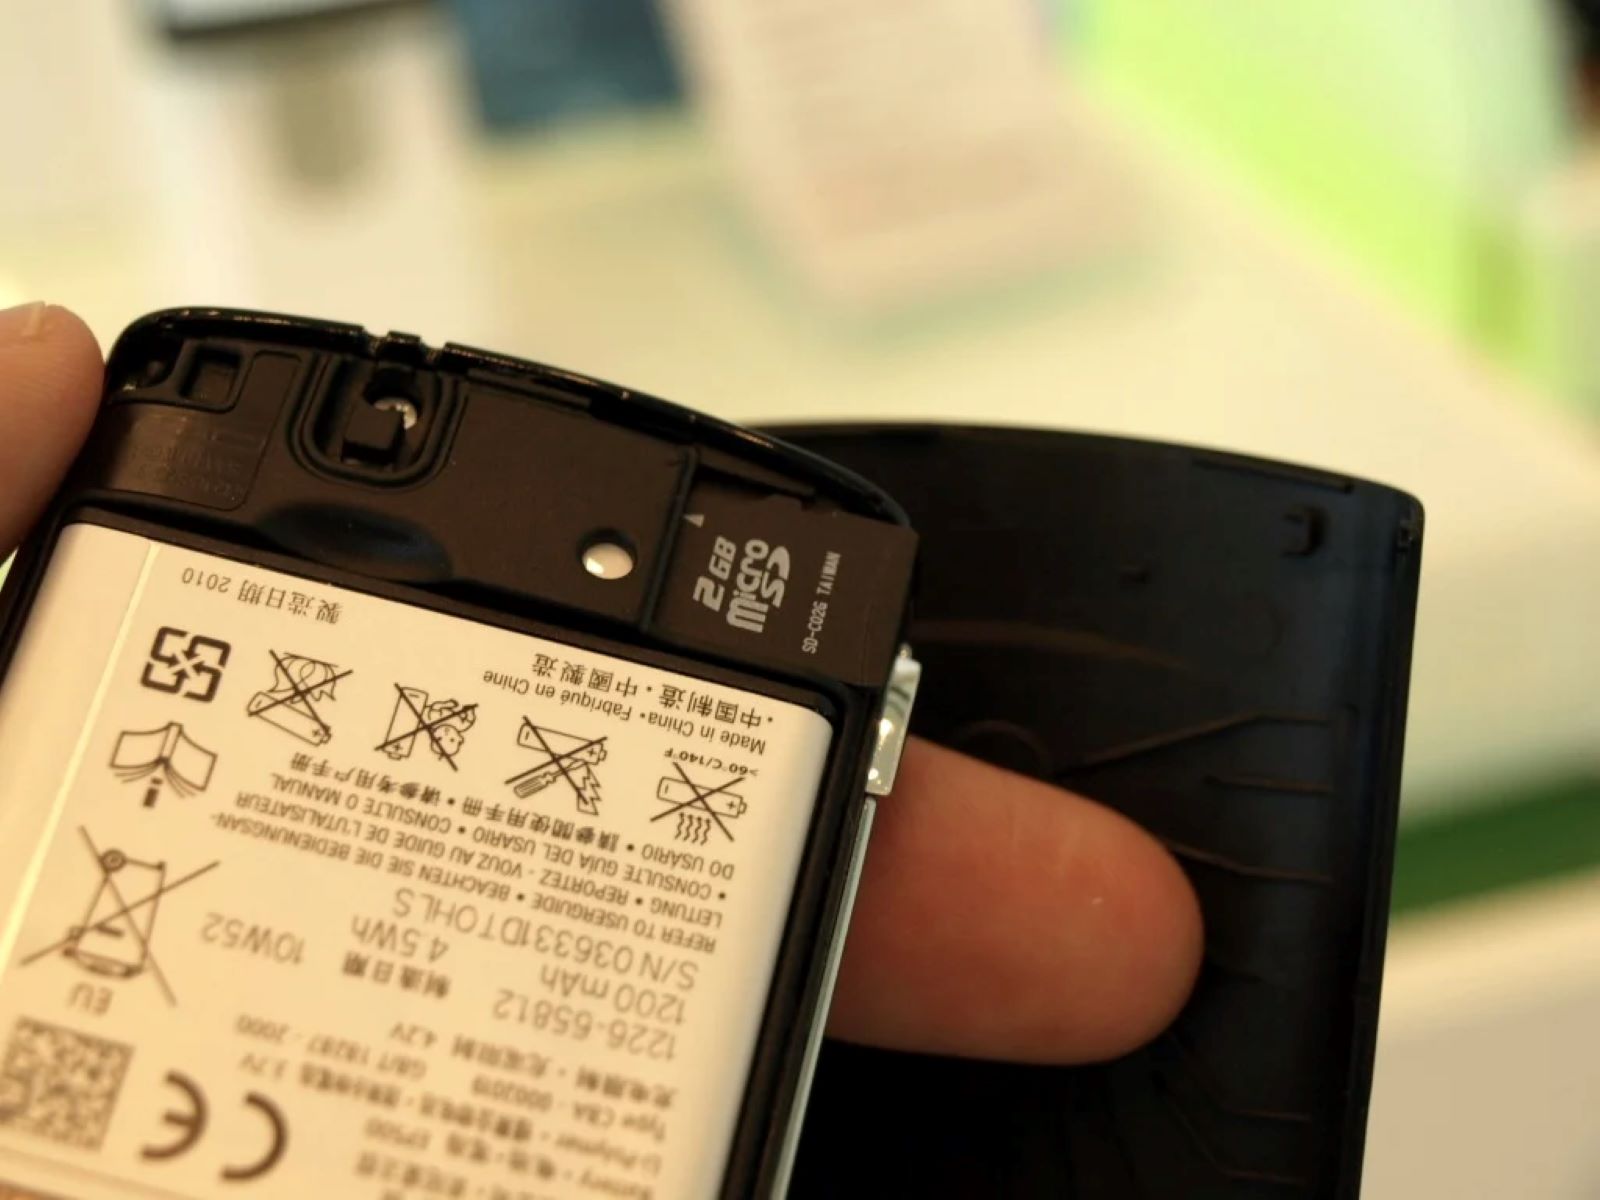 Safely Removing Battery From Sony Xperia Mini